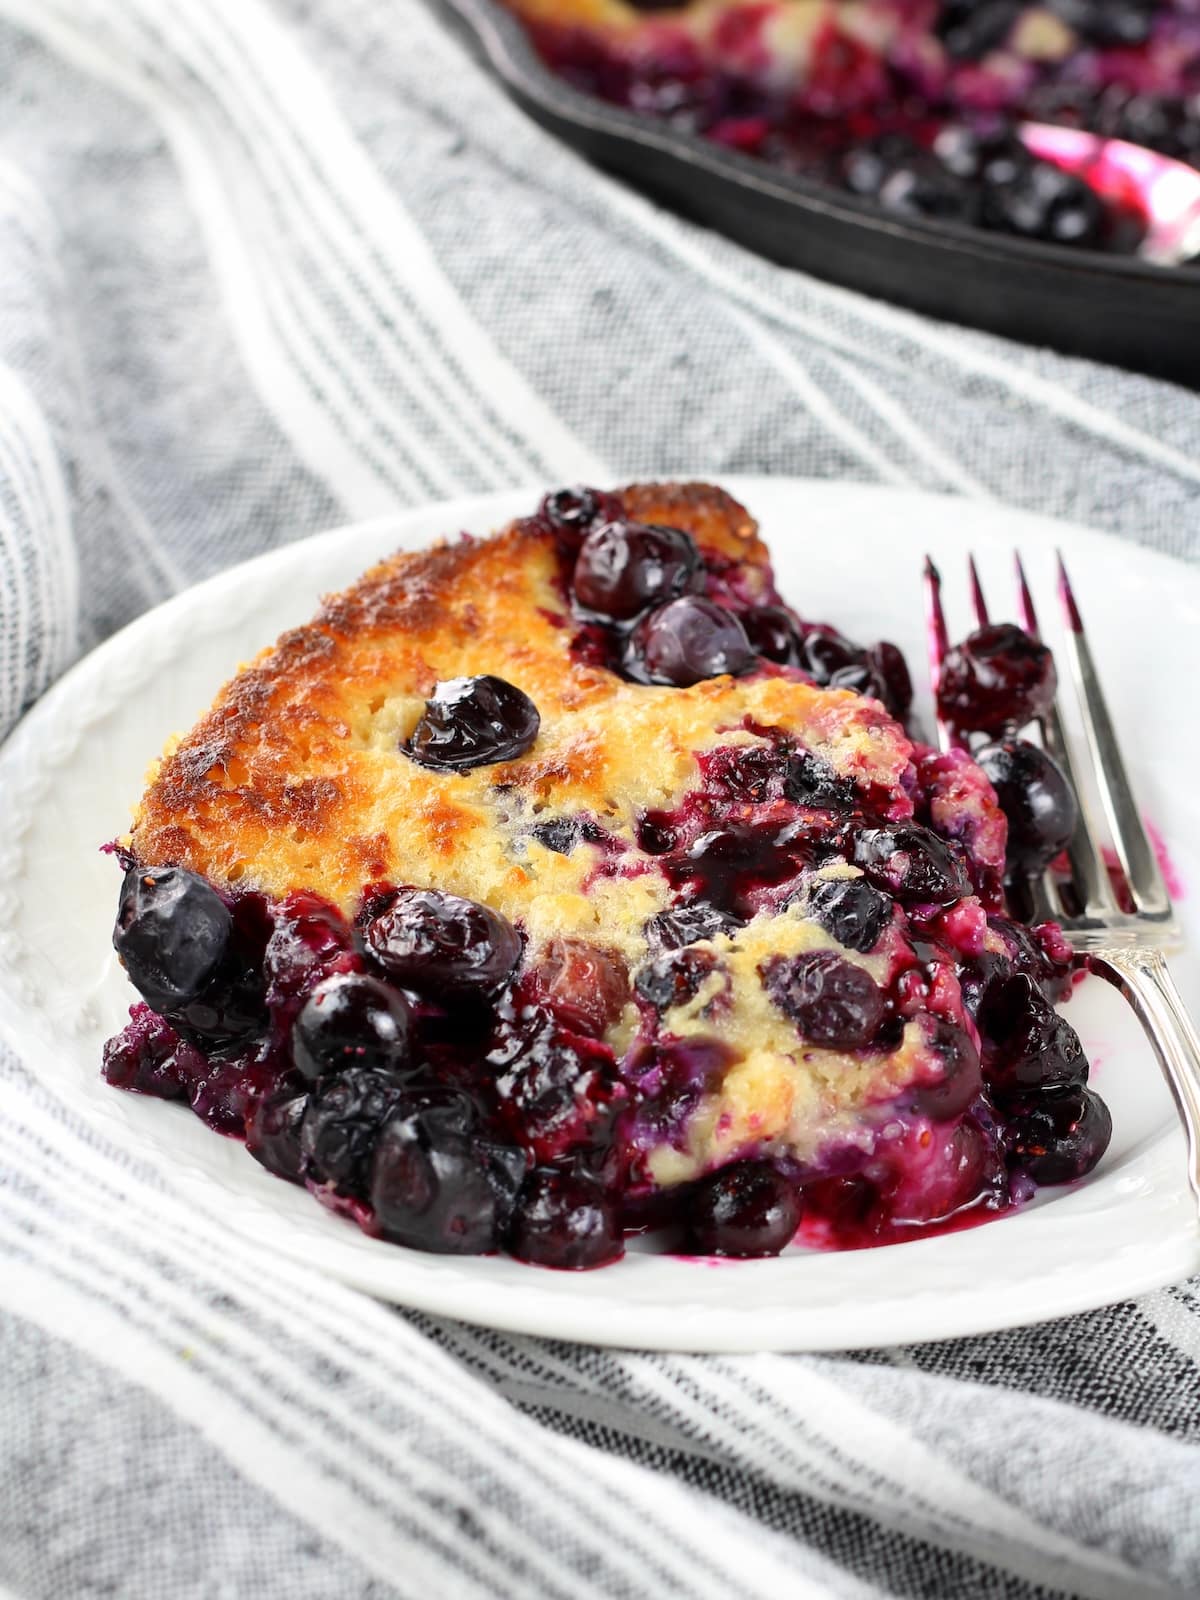 A piece of baked blueberries and batter.